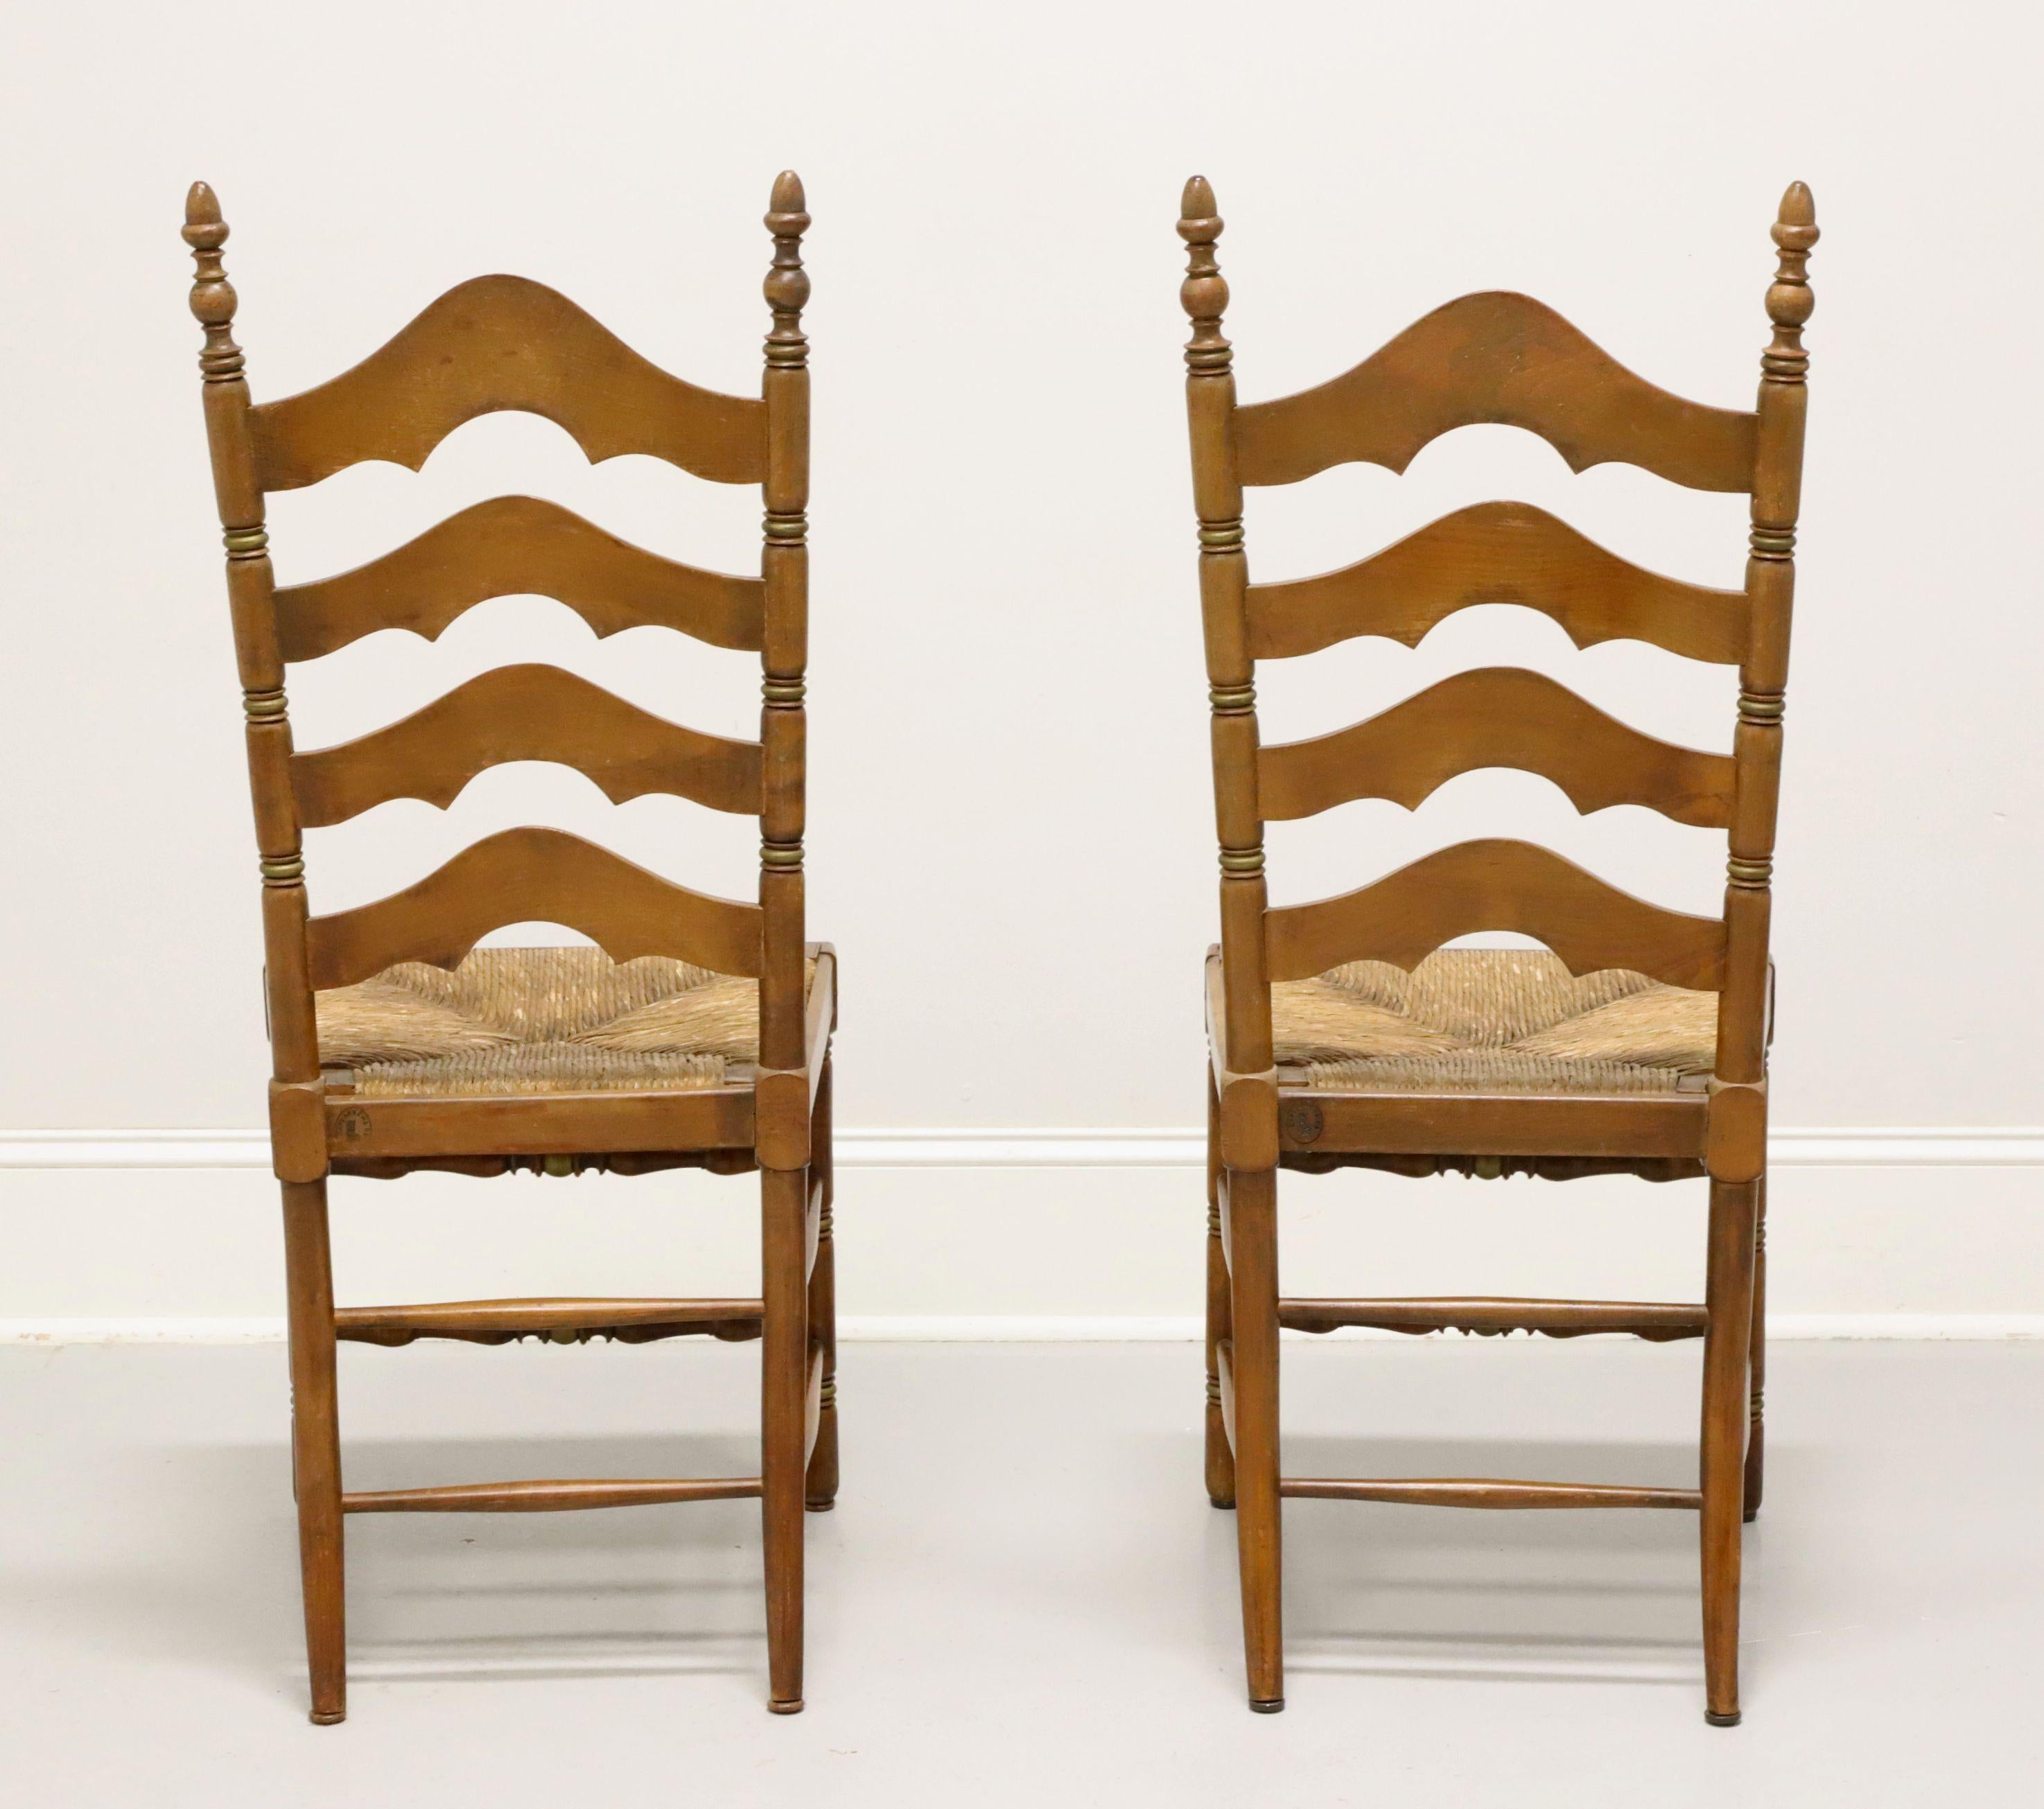 CAPE ANN CHAIRS Maple Ladder Back Dining Side Chairs with Rush Seats - Pair A In Good Condition For Sale In Charlotte, NC